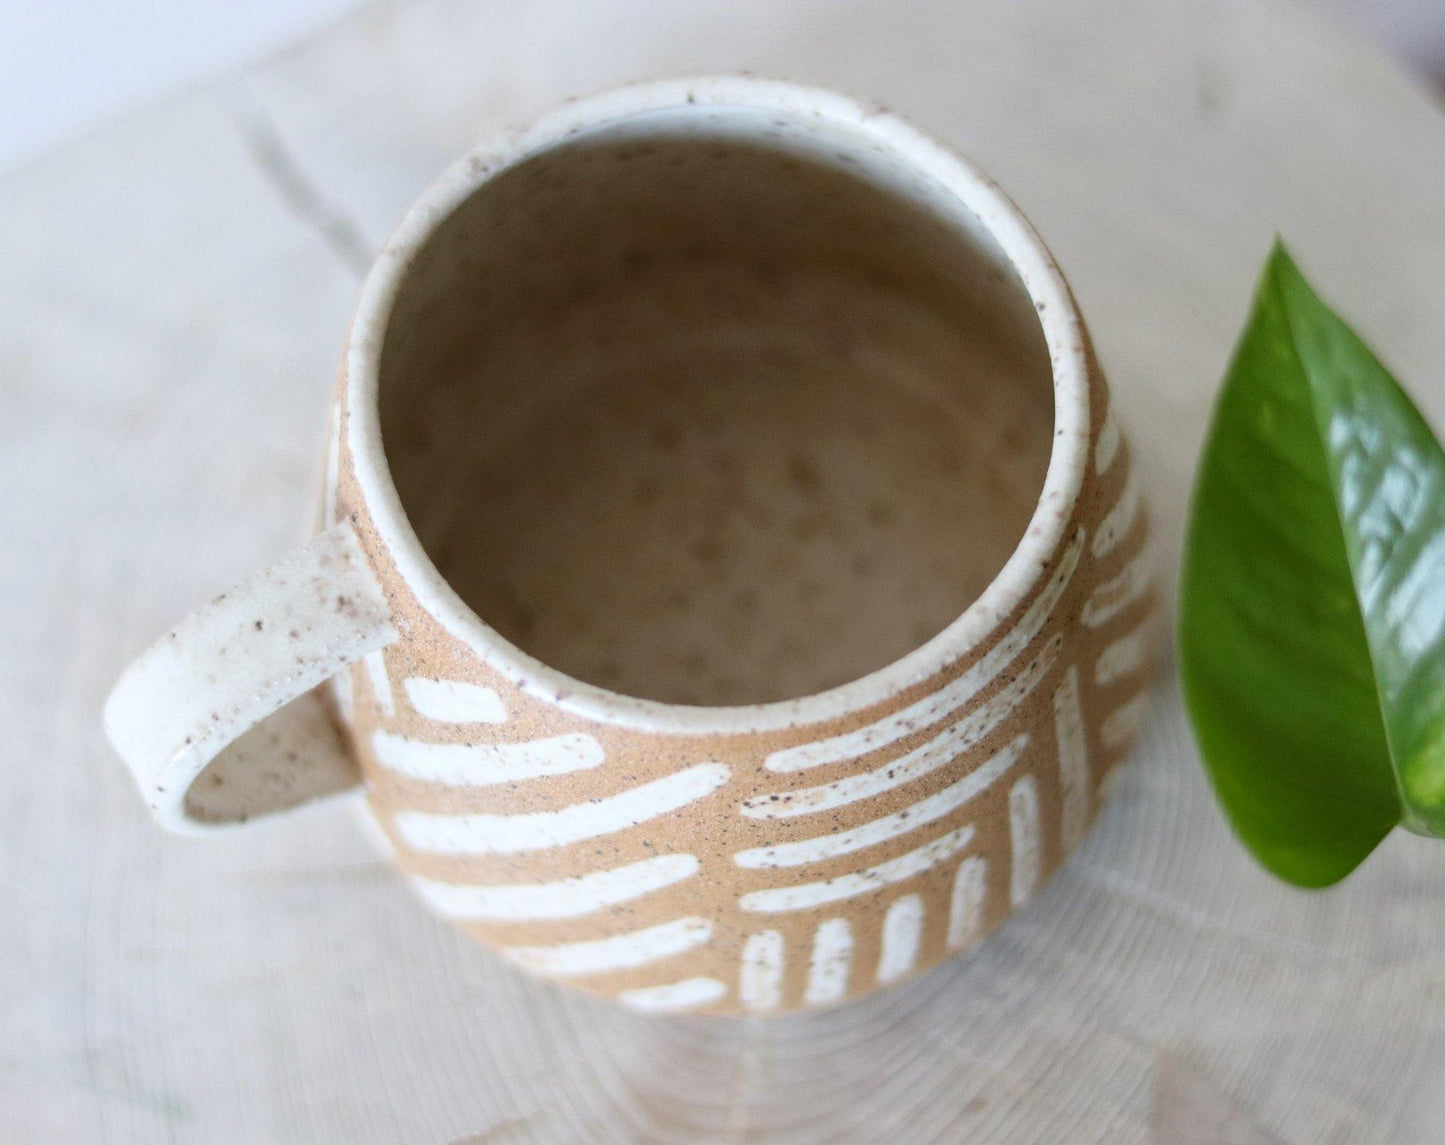 Handmade neutral mug with a speckled clay body and handpainted lines. Made by void and form ceramics.